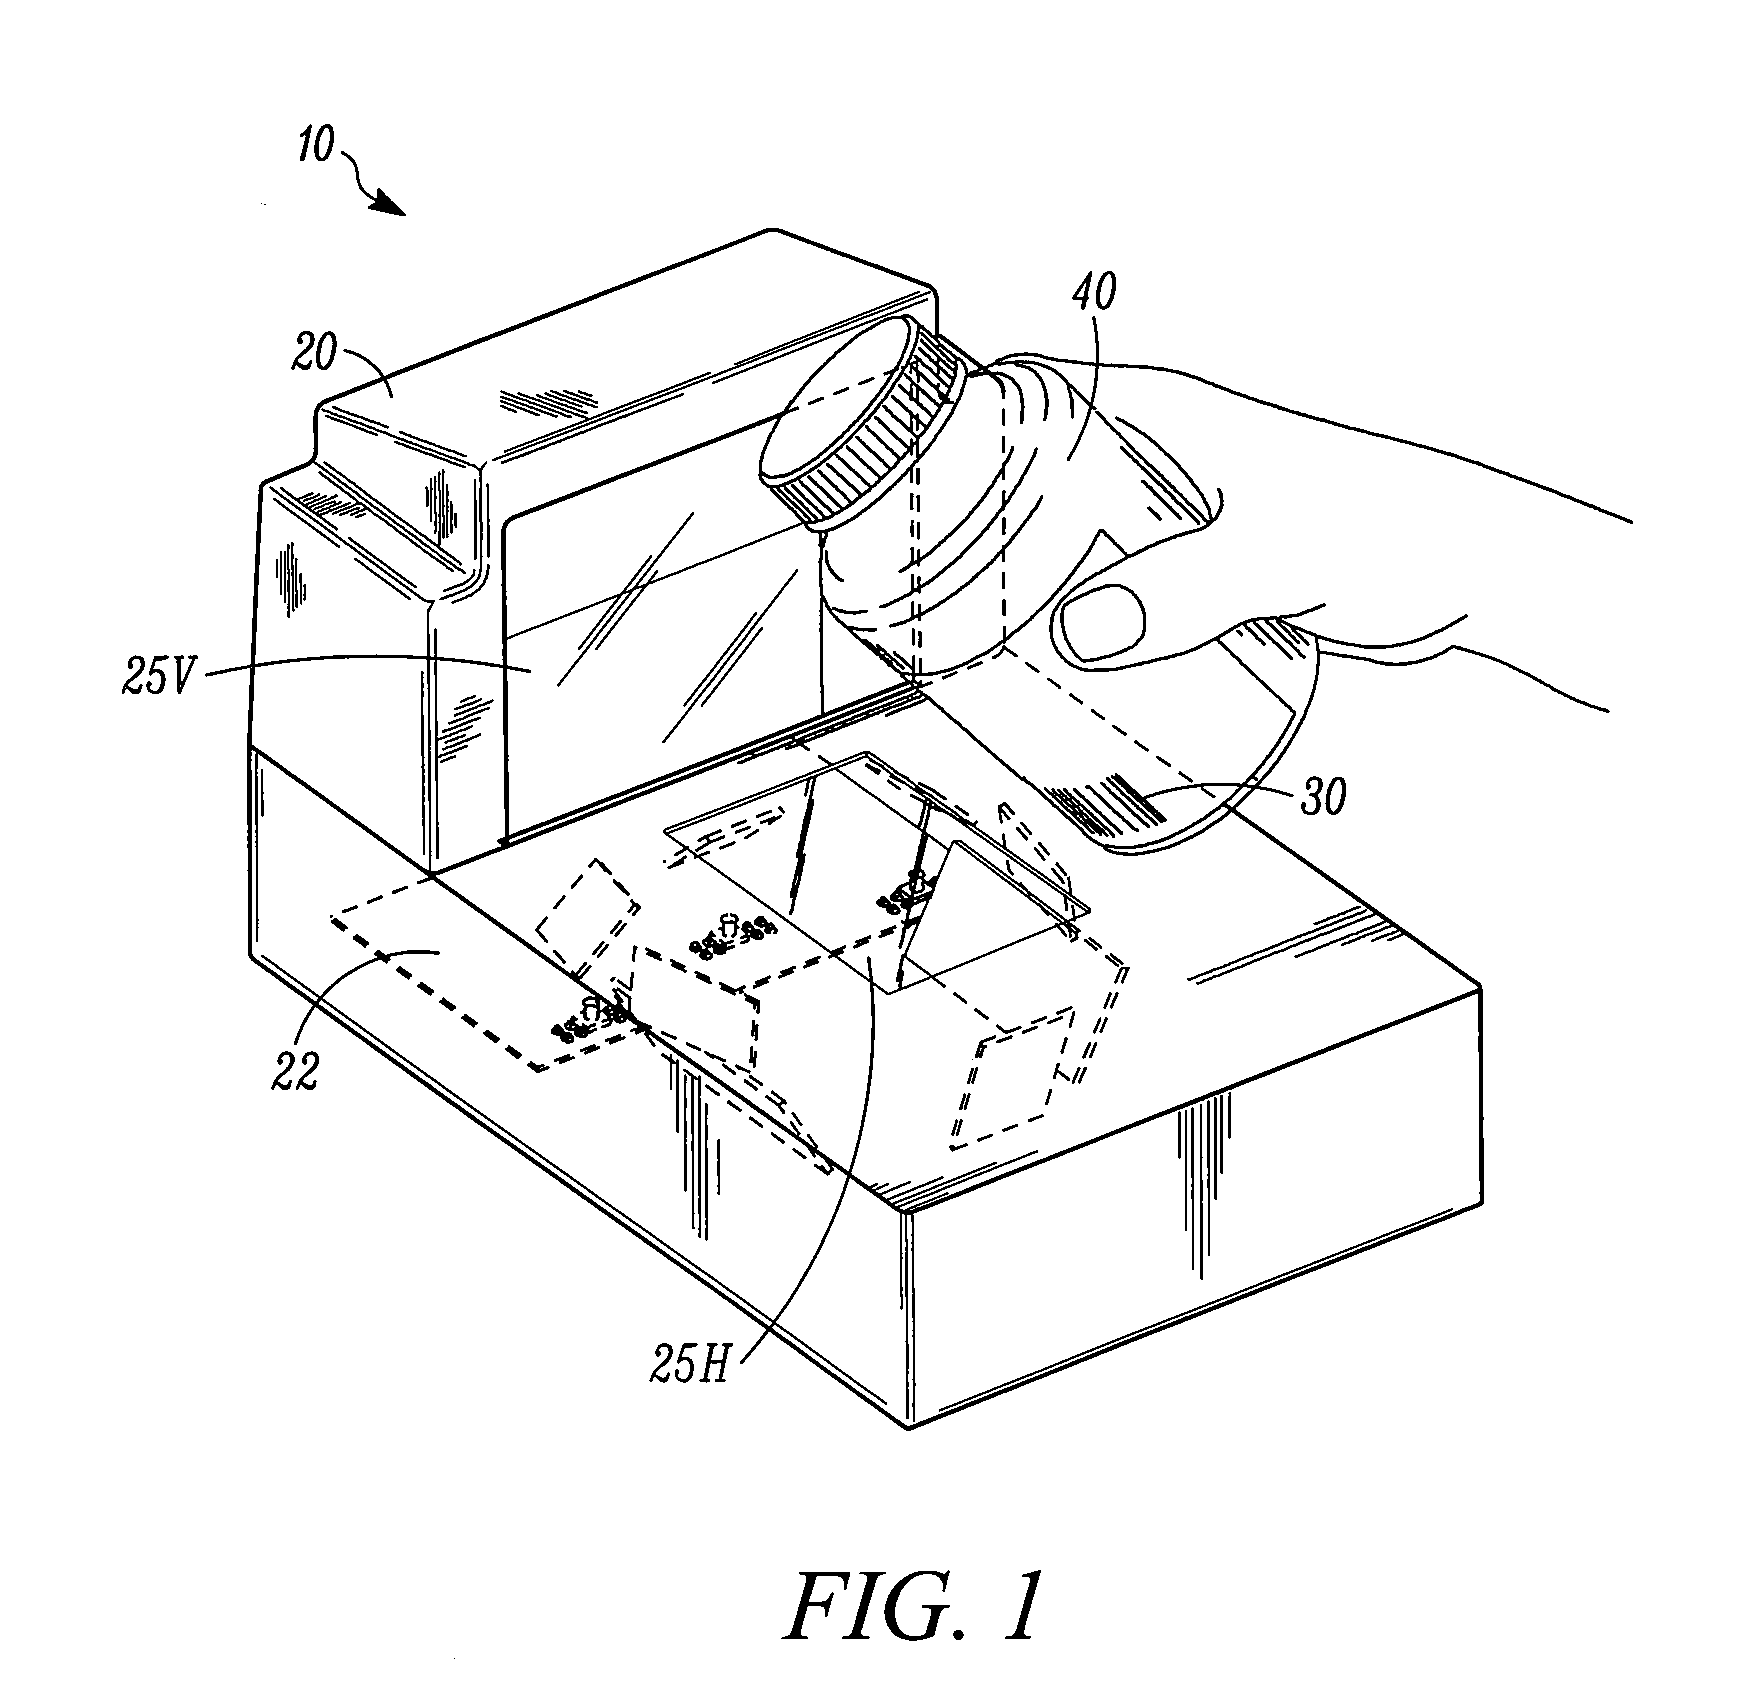 Method and apparatus for intelligently controlling illumination patterns projected from barcode readers